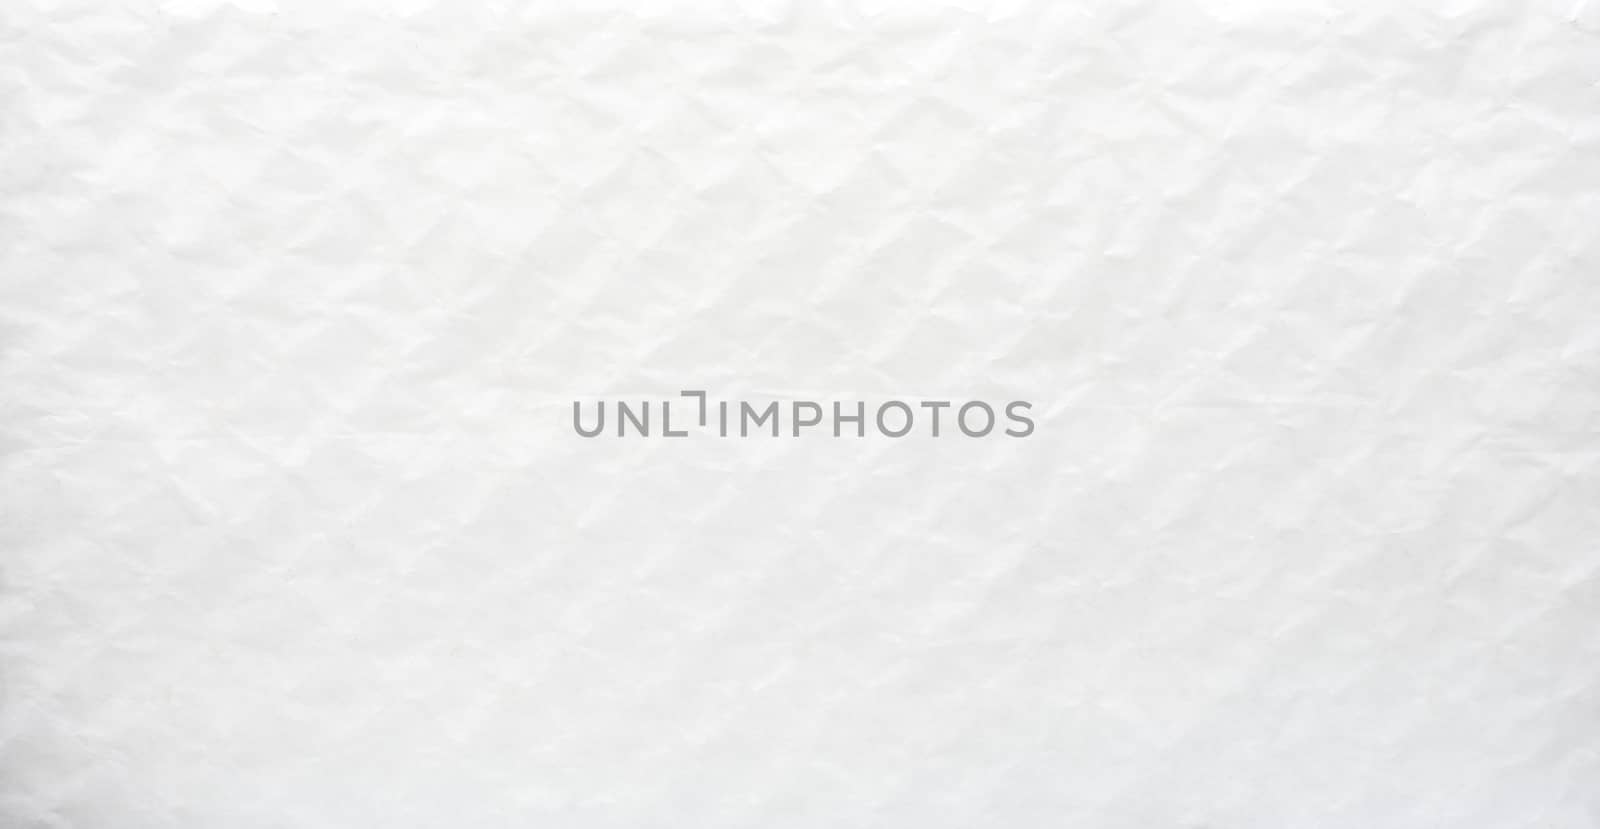 White crumpled paper for background image